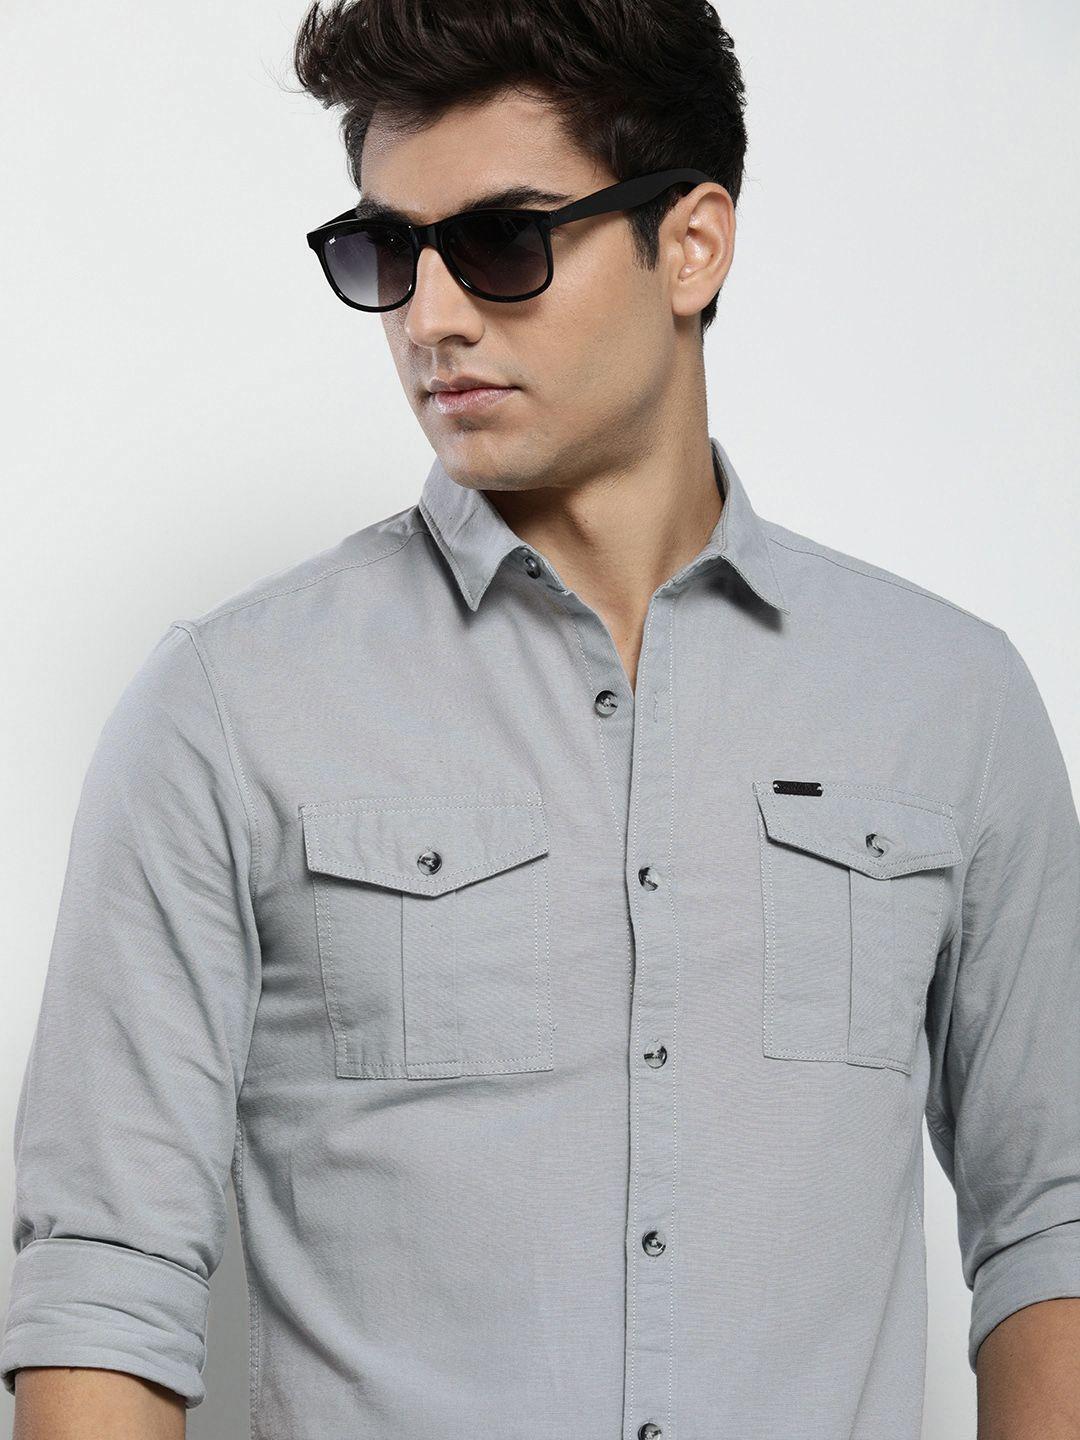 the-indian-garage-co-men-grey-solid-casual-shirt